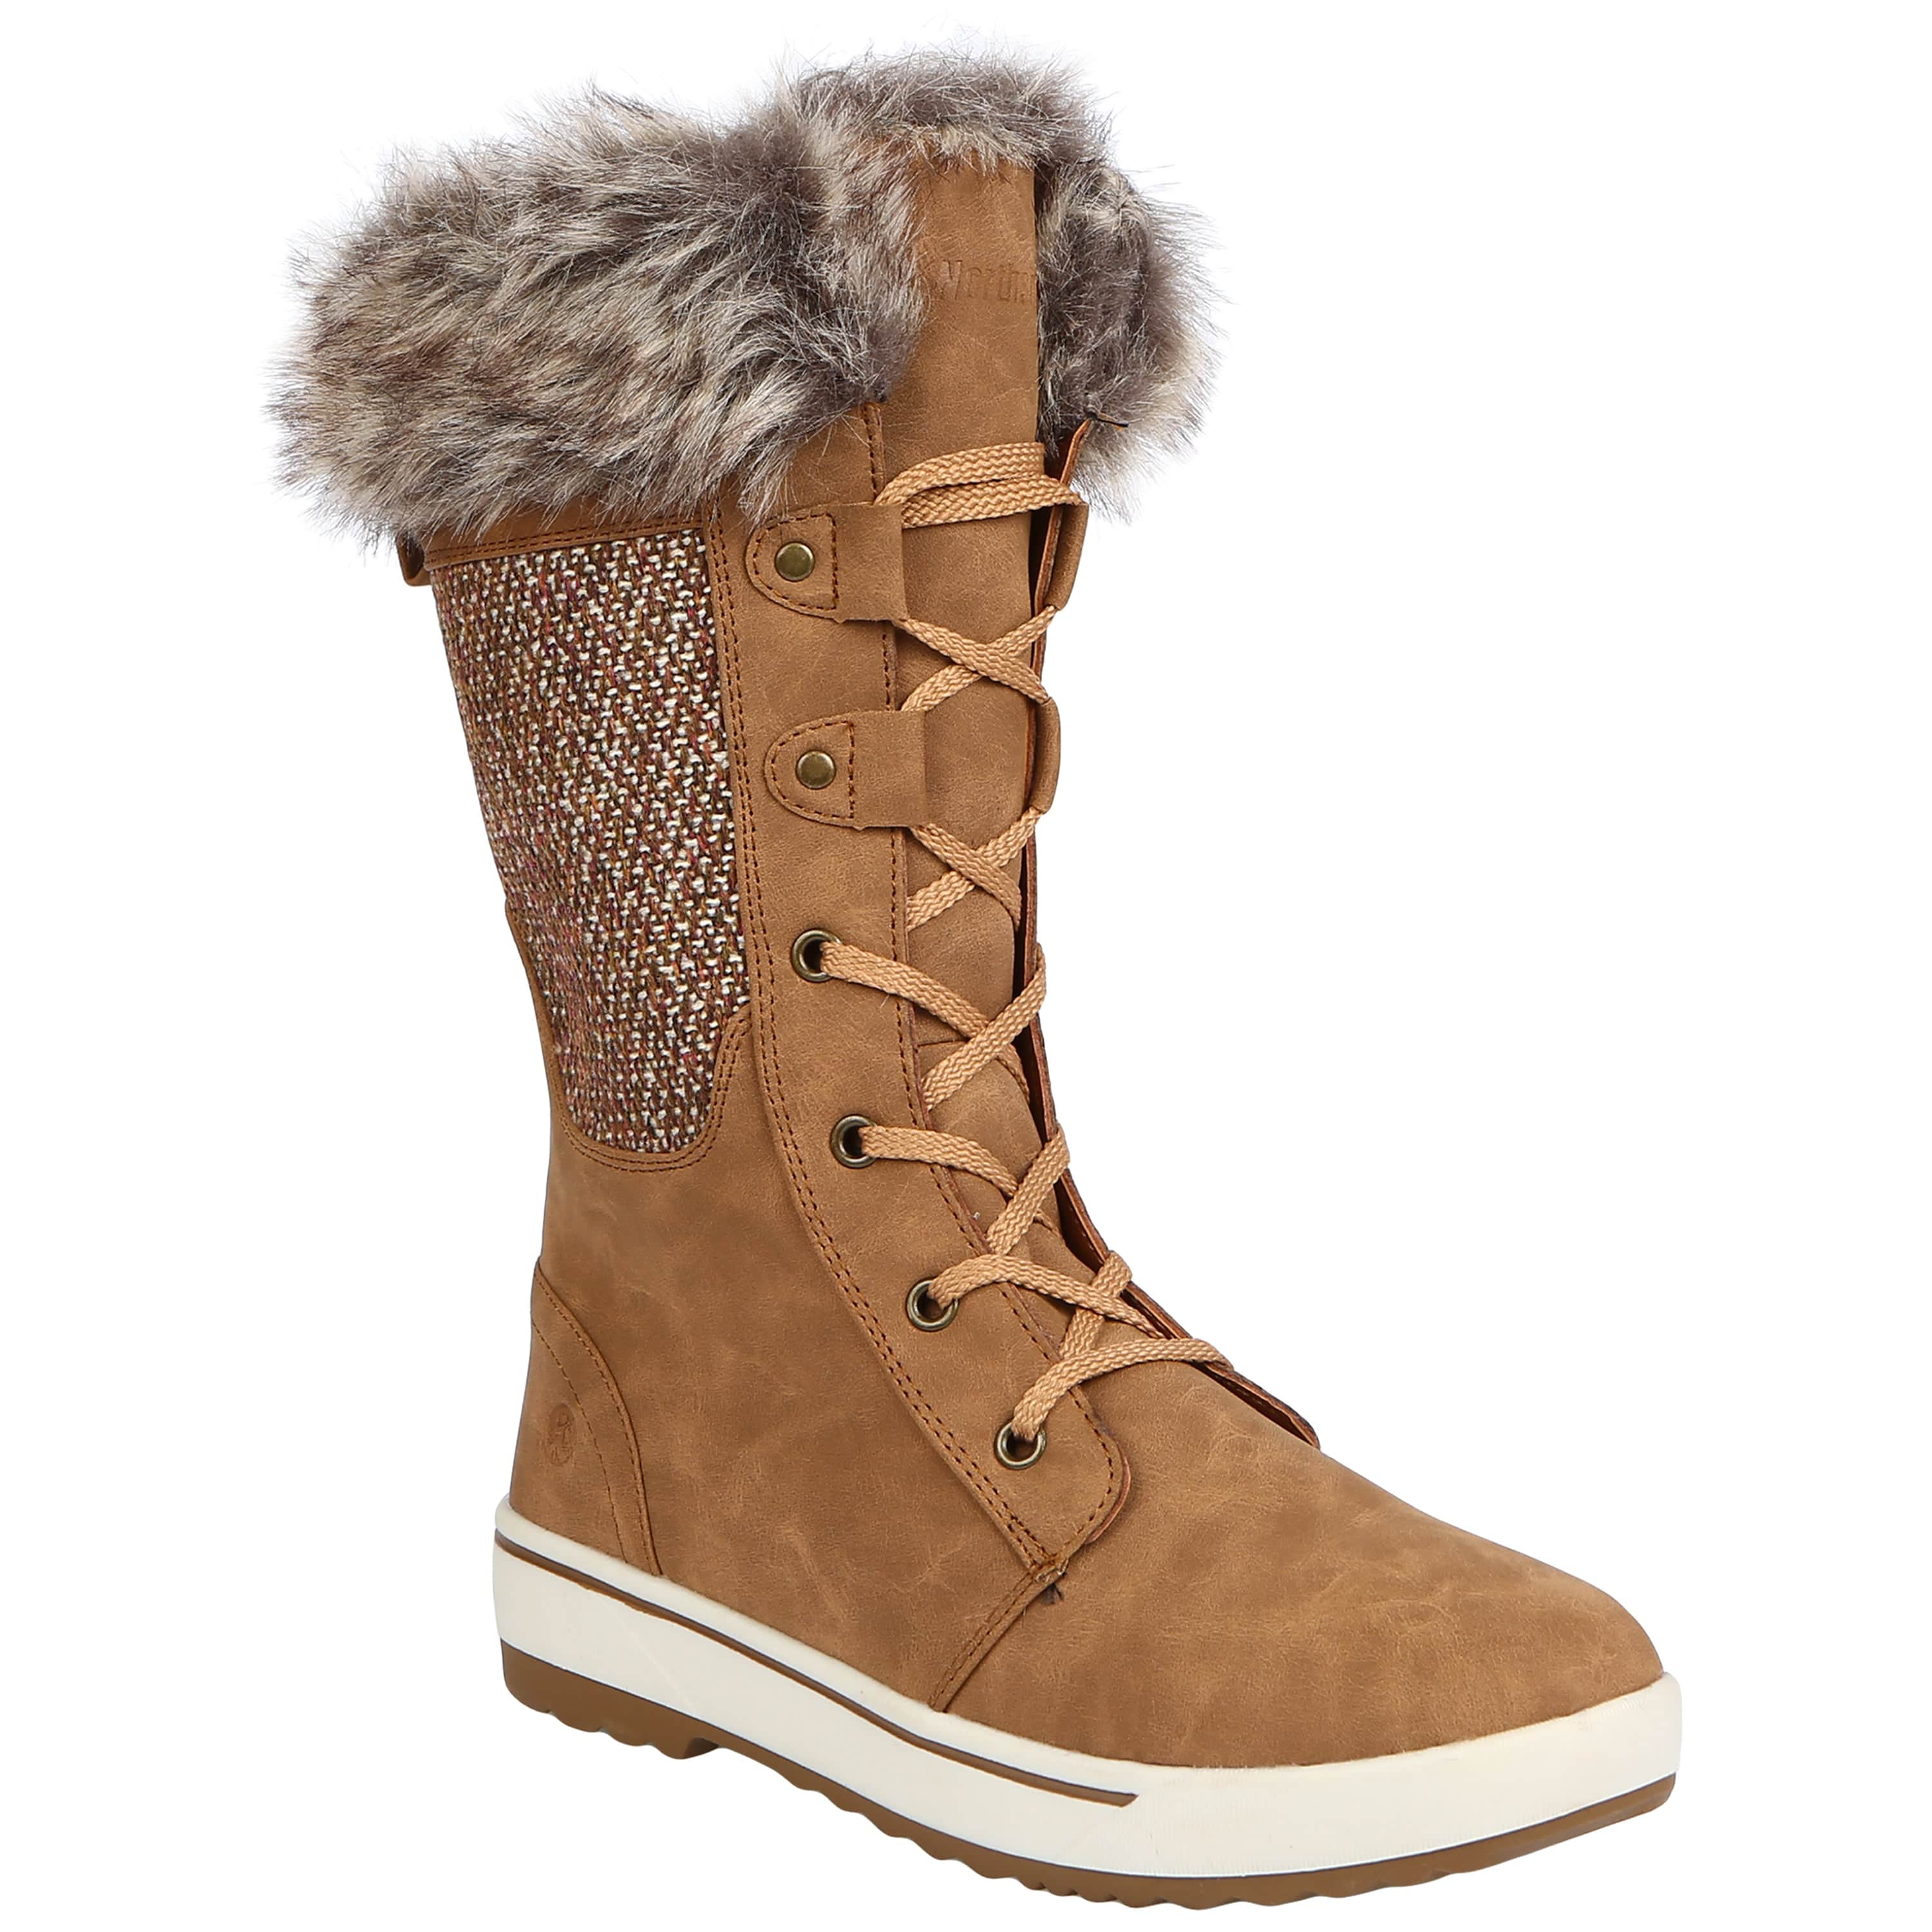 Warmth and Style: Women's Bishop SE Winter Boot